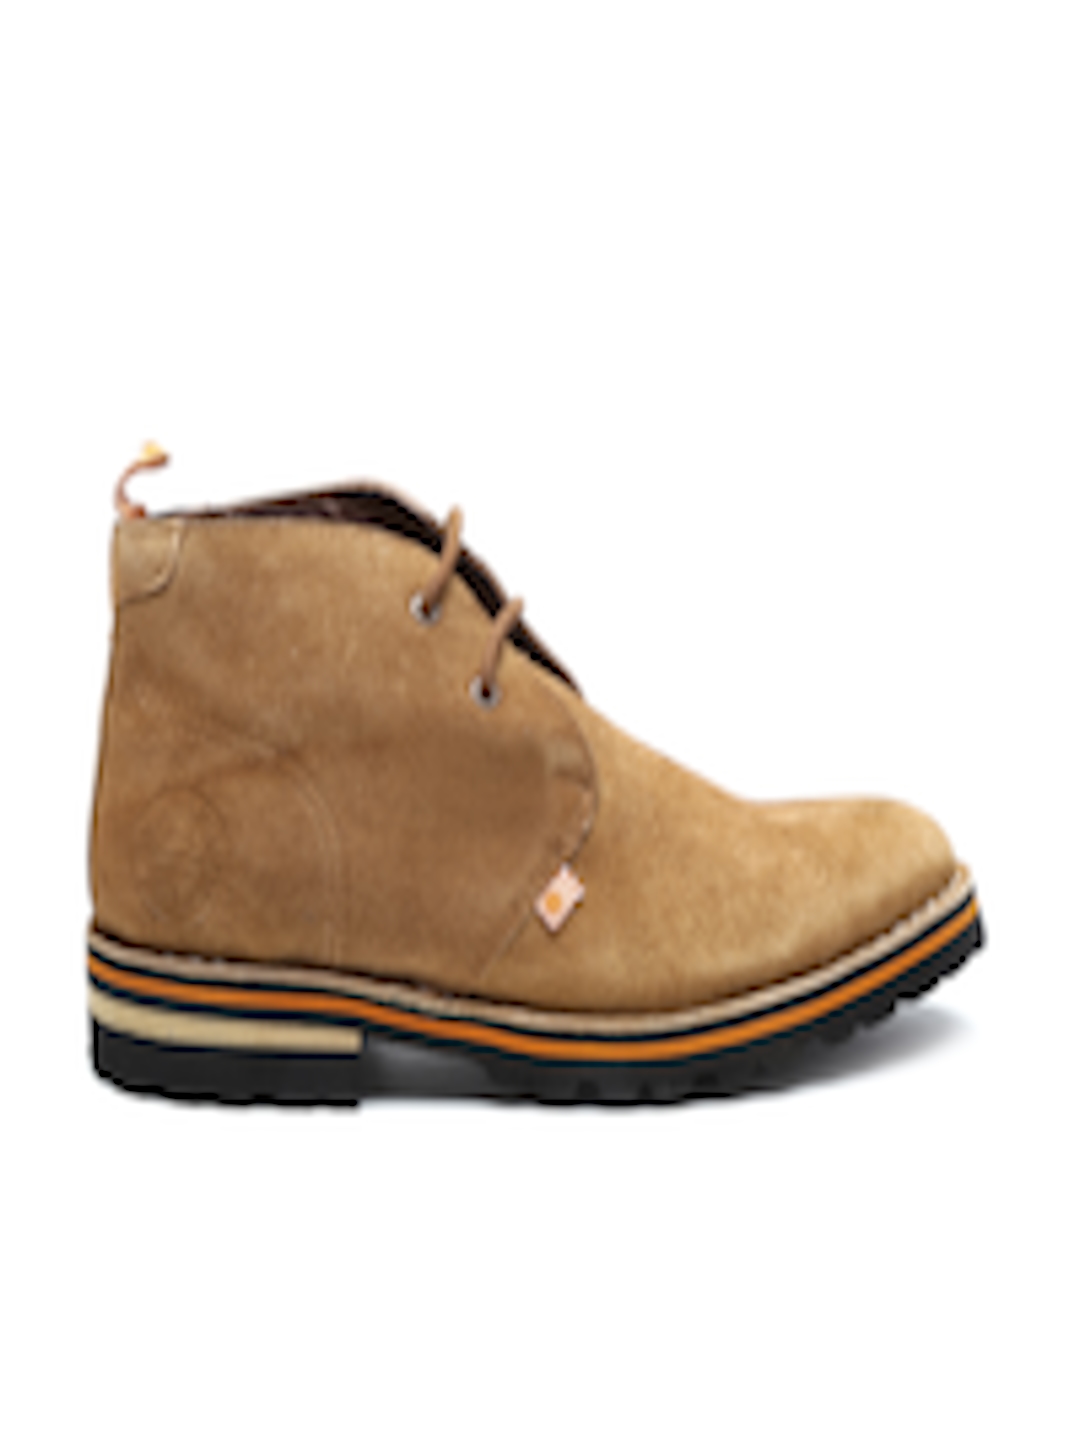 Buy Superdry Men Brown Leather Boots - Casual Shoes for Men 1173274 ...